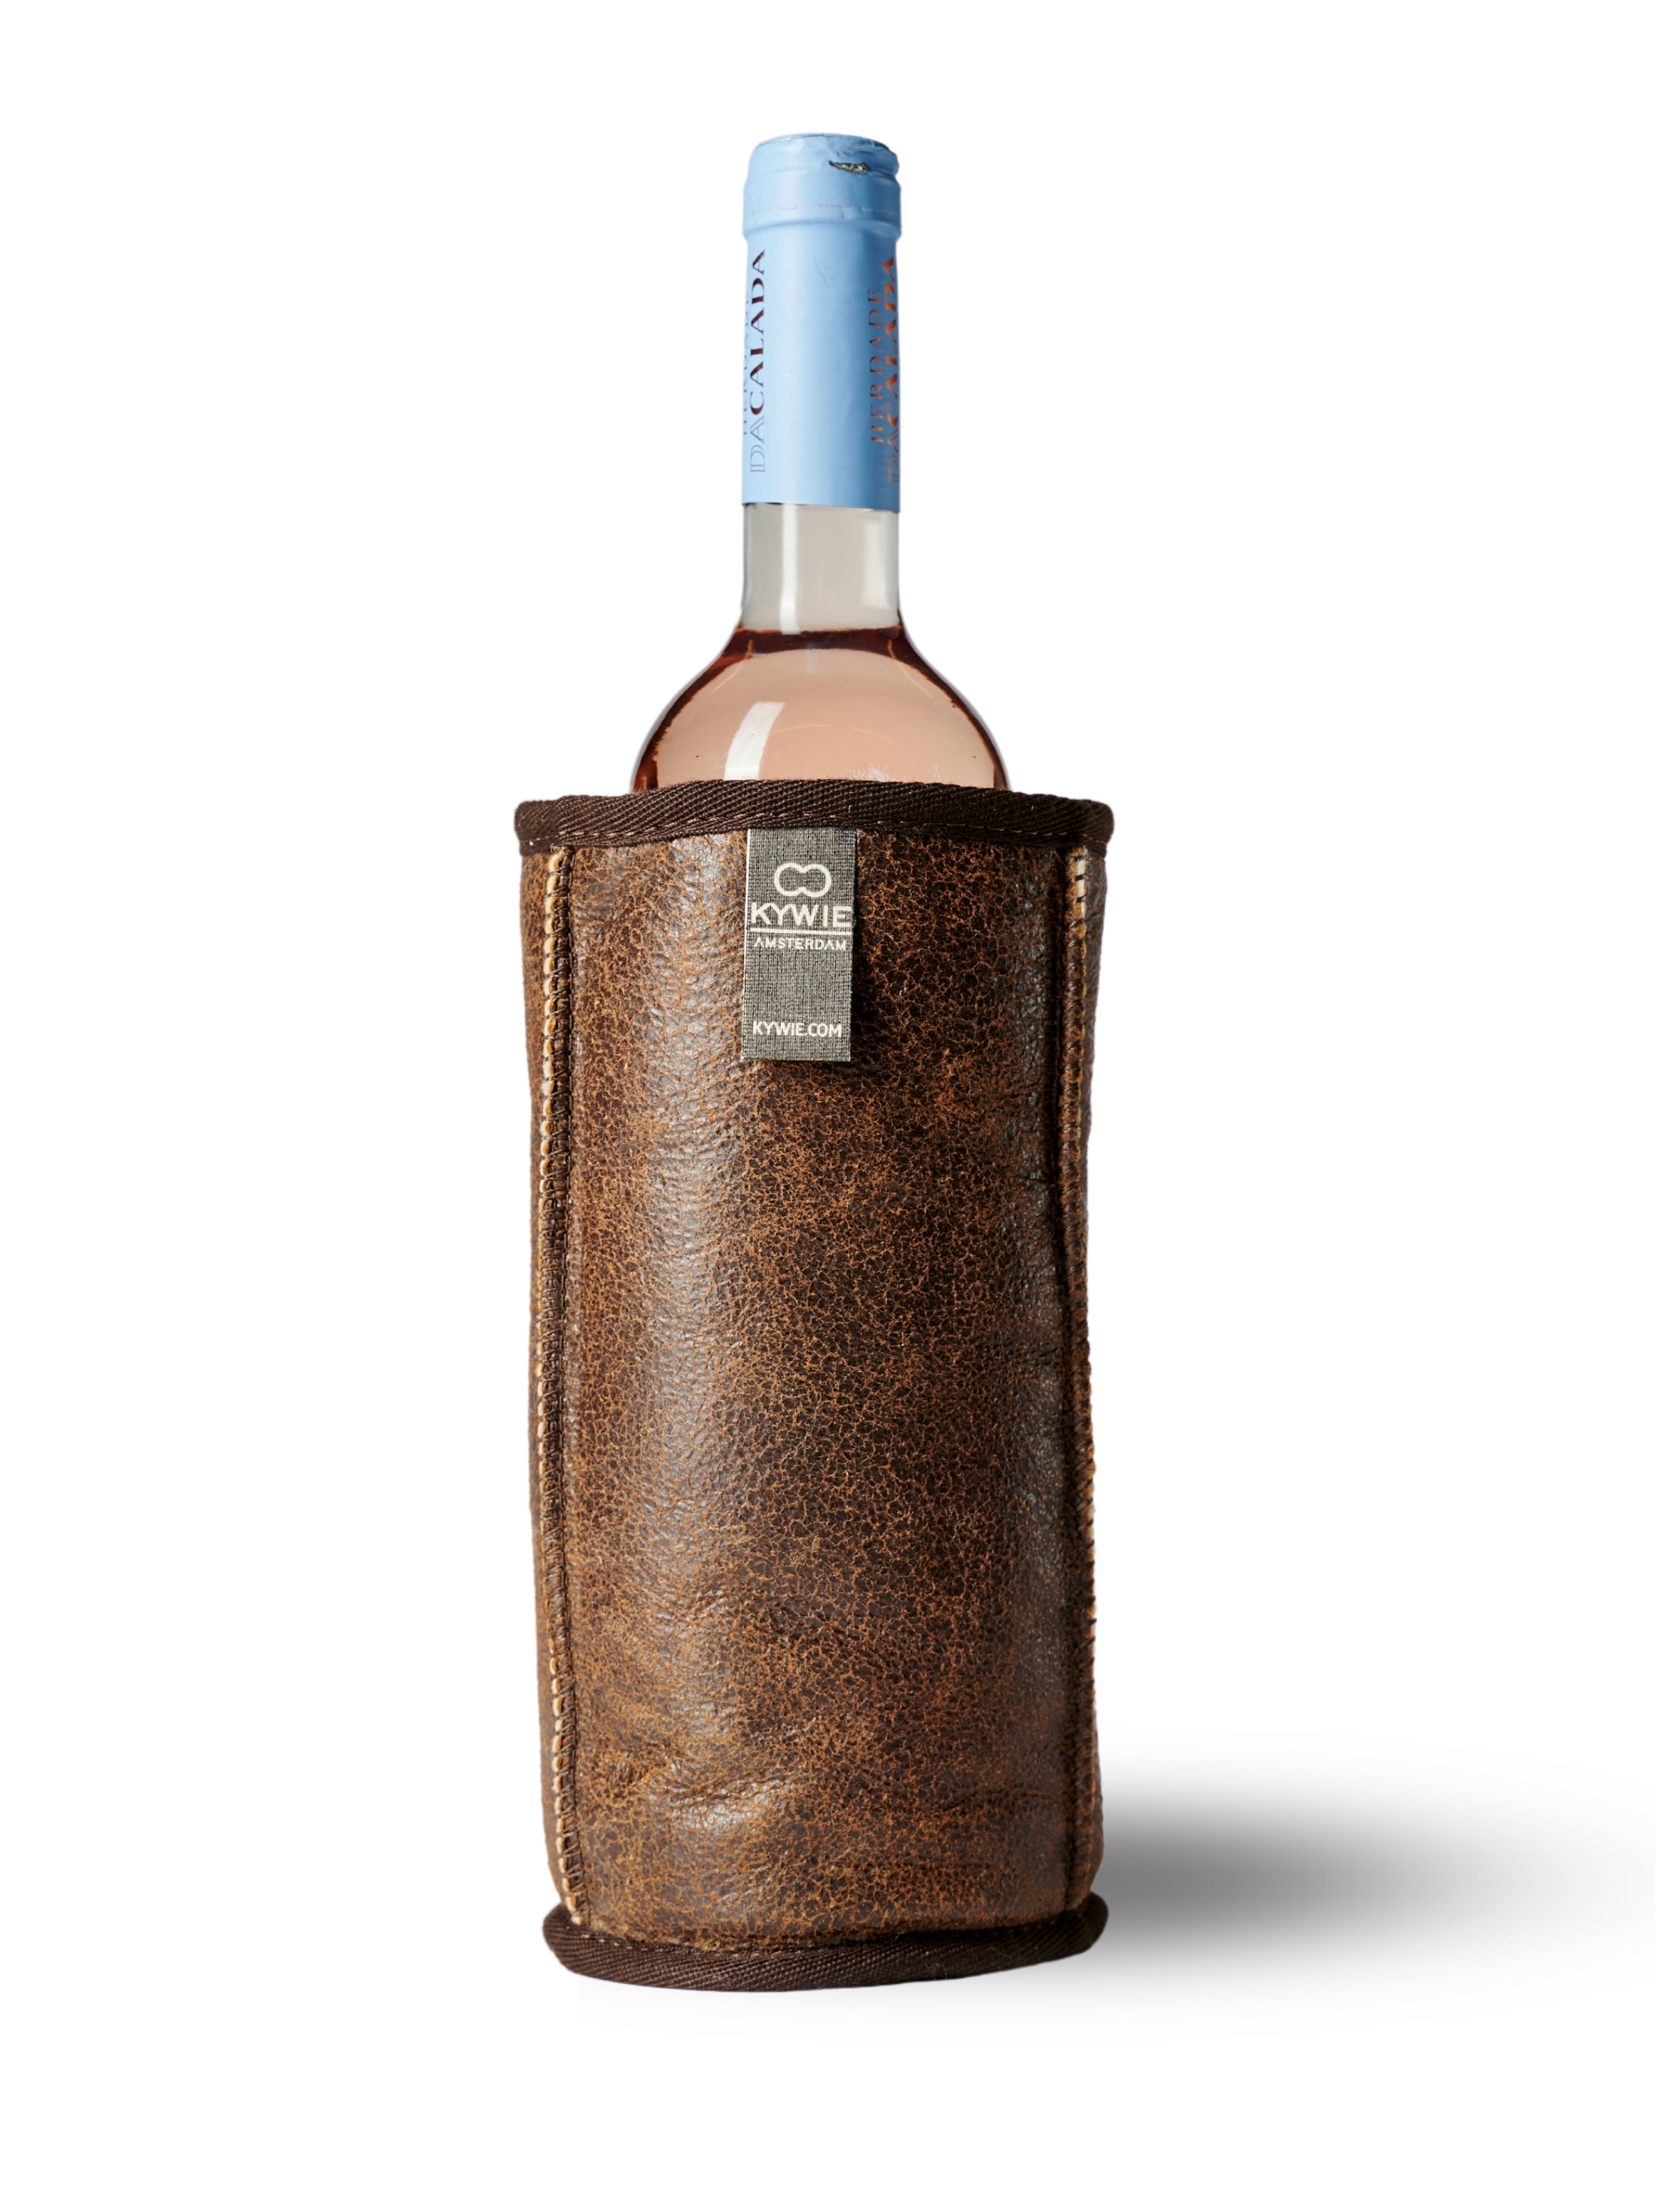 KYWIE Wine Cooler Brown Leather